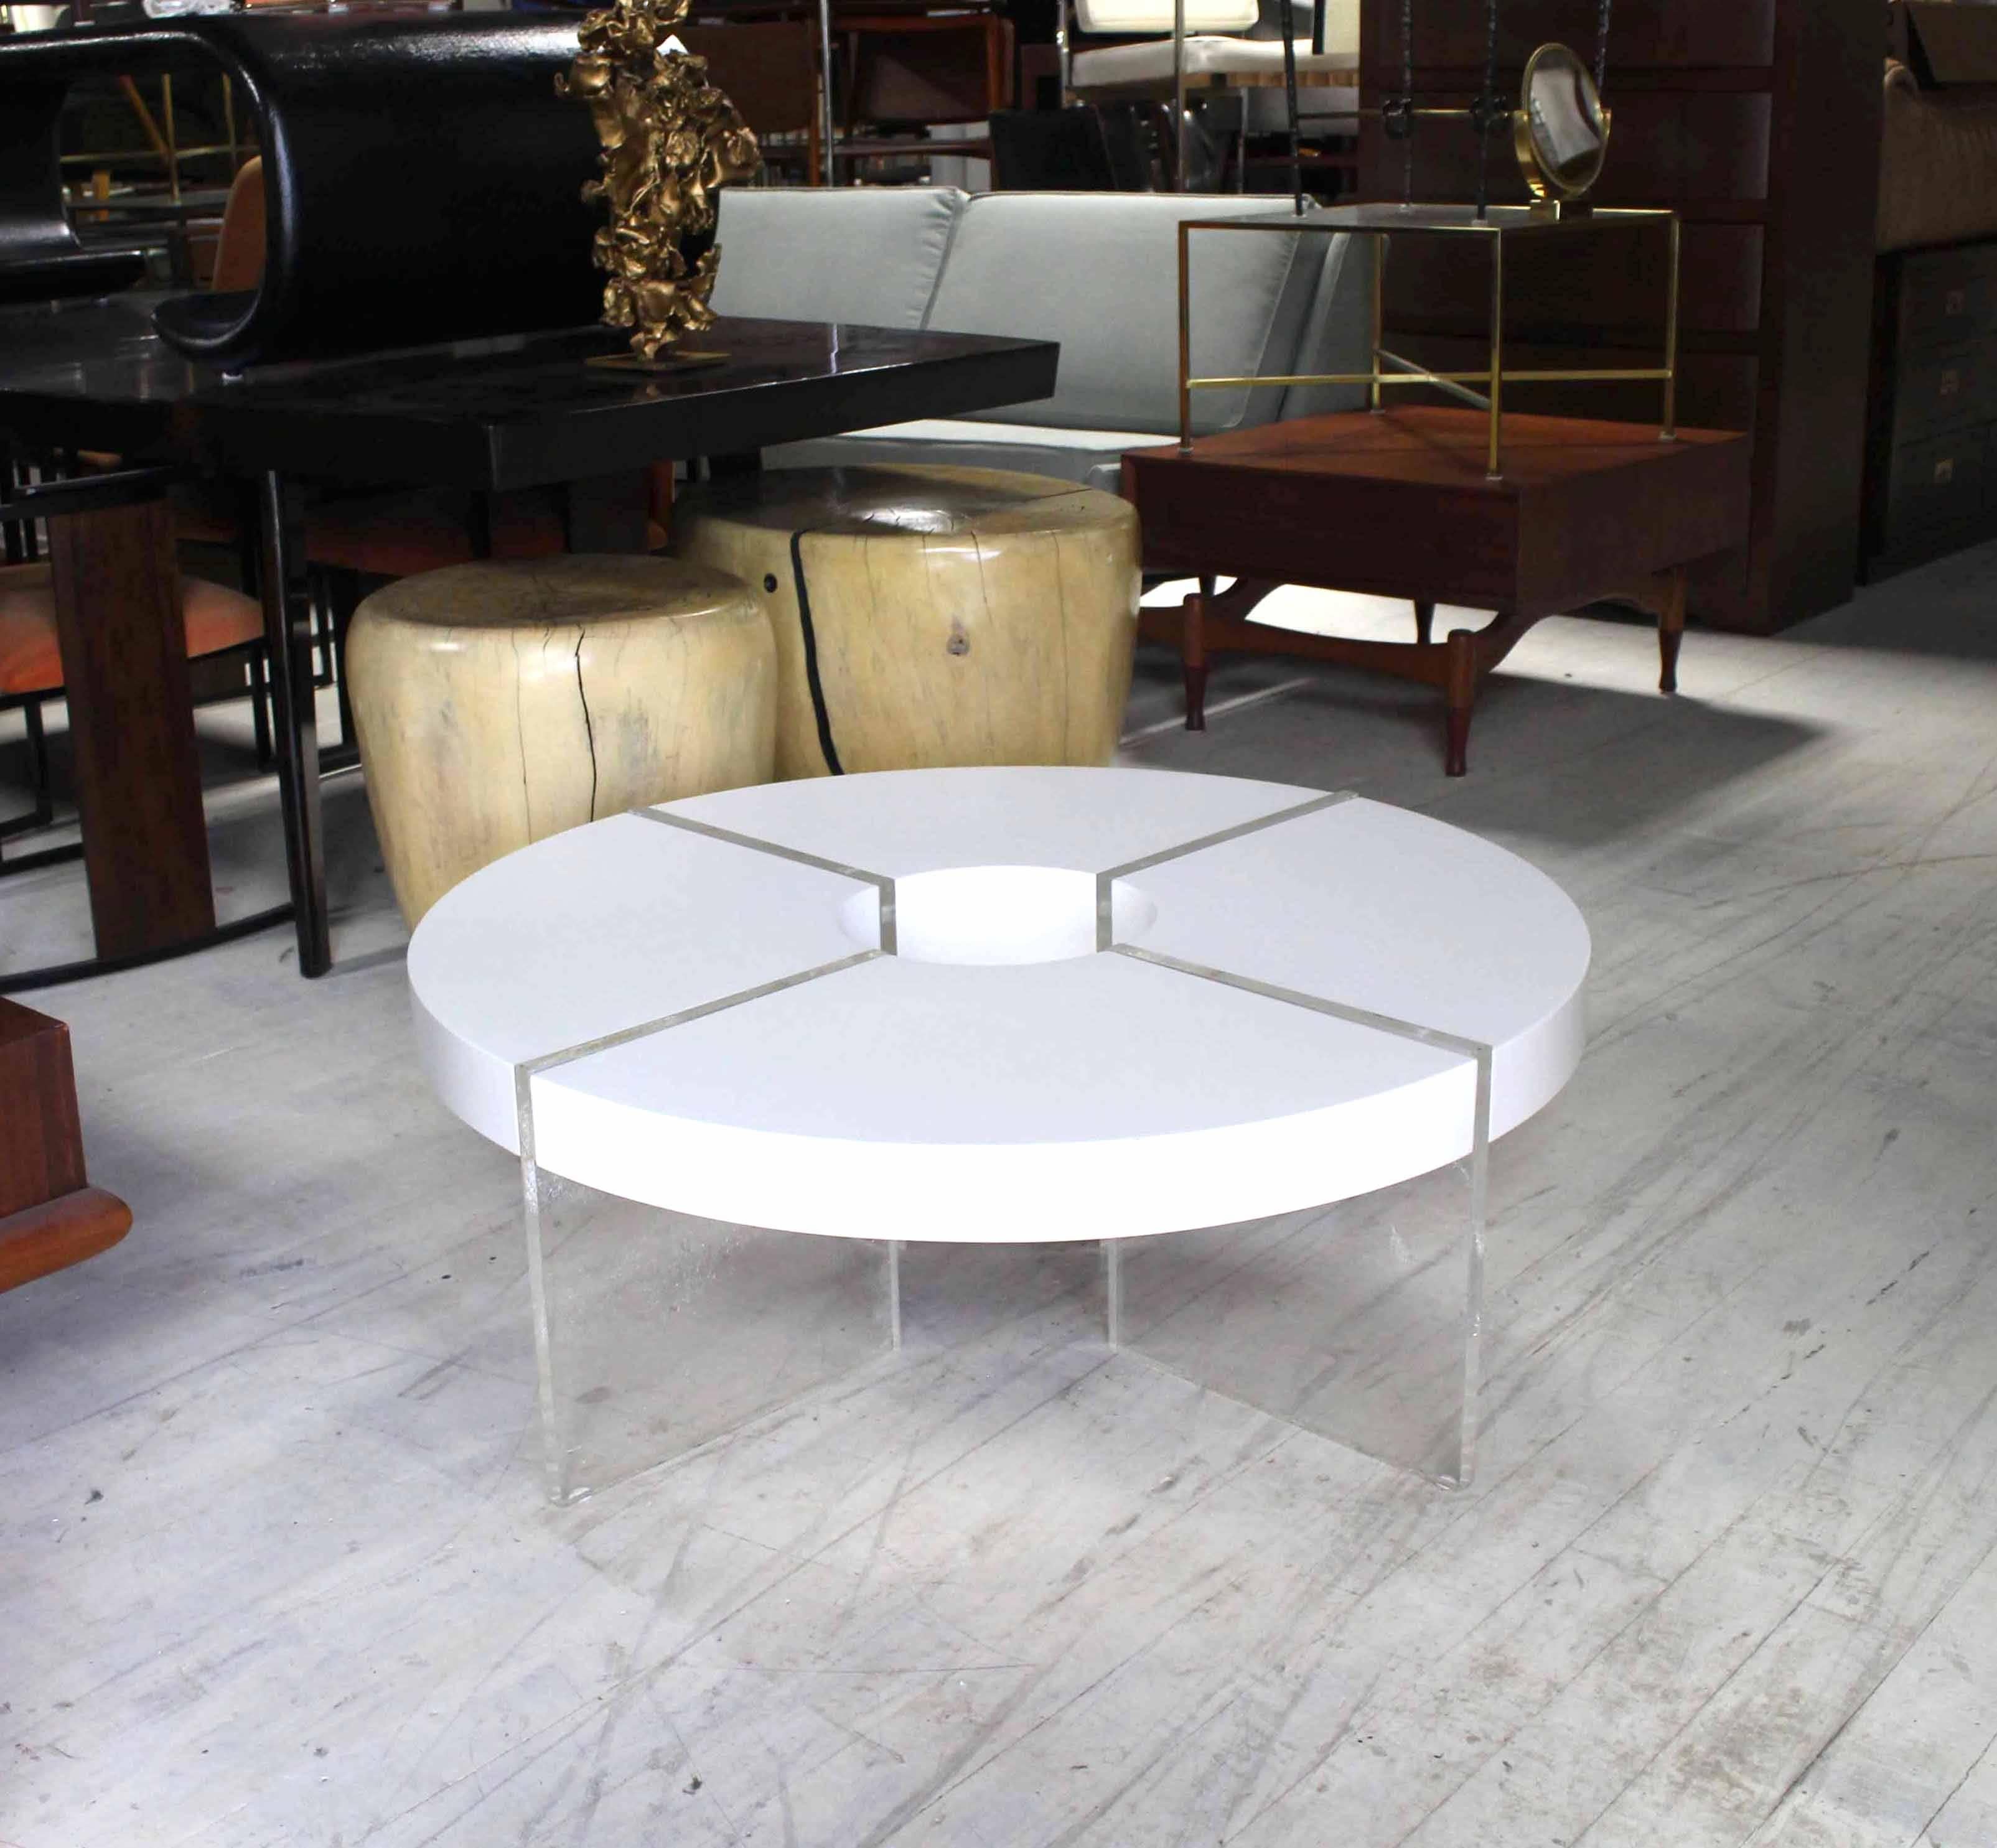 Very nice Mid-Century Modern Lucite base coffee table on Lucite legs with white lacquer top. Measures: 41" diameter.